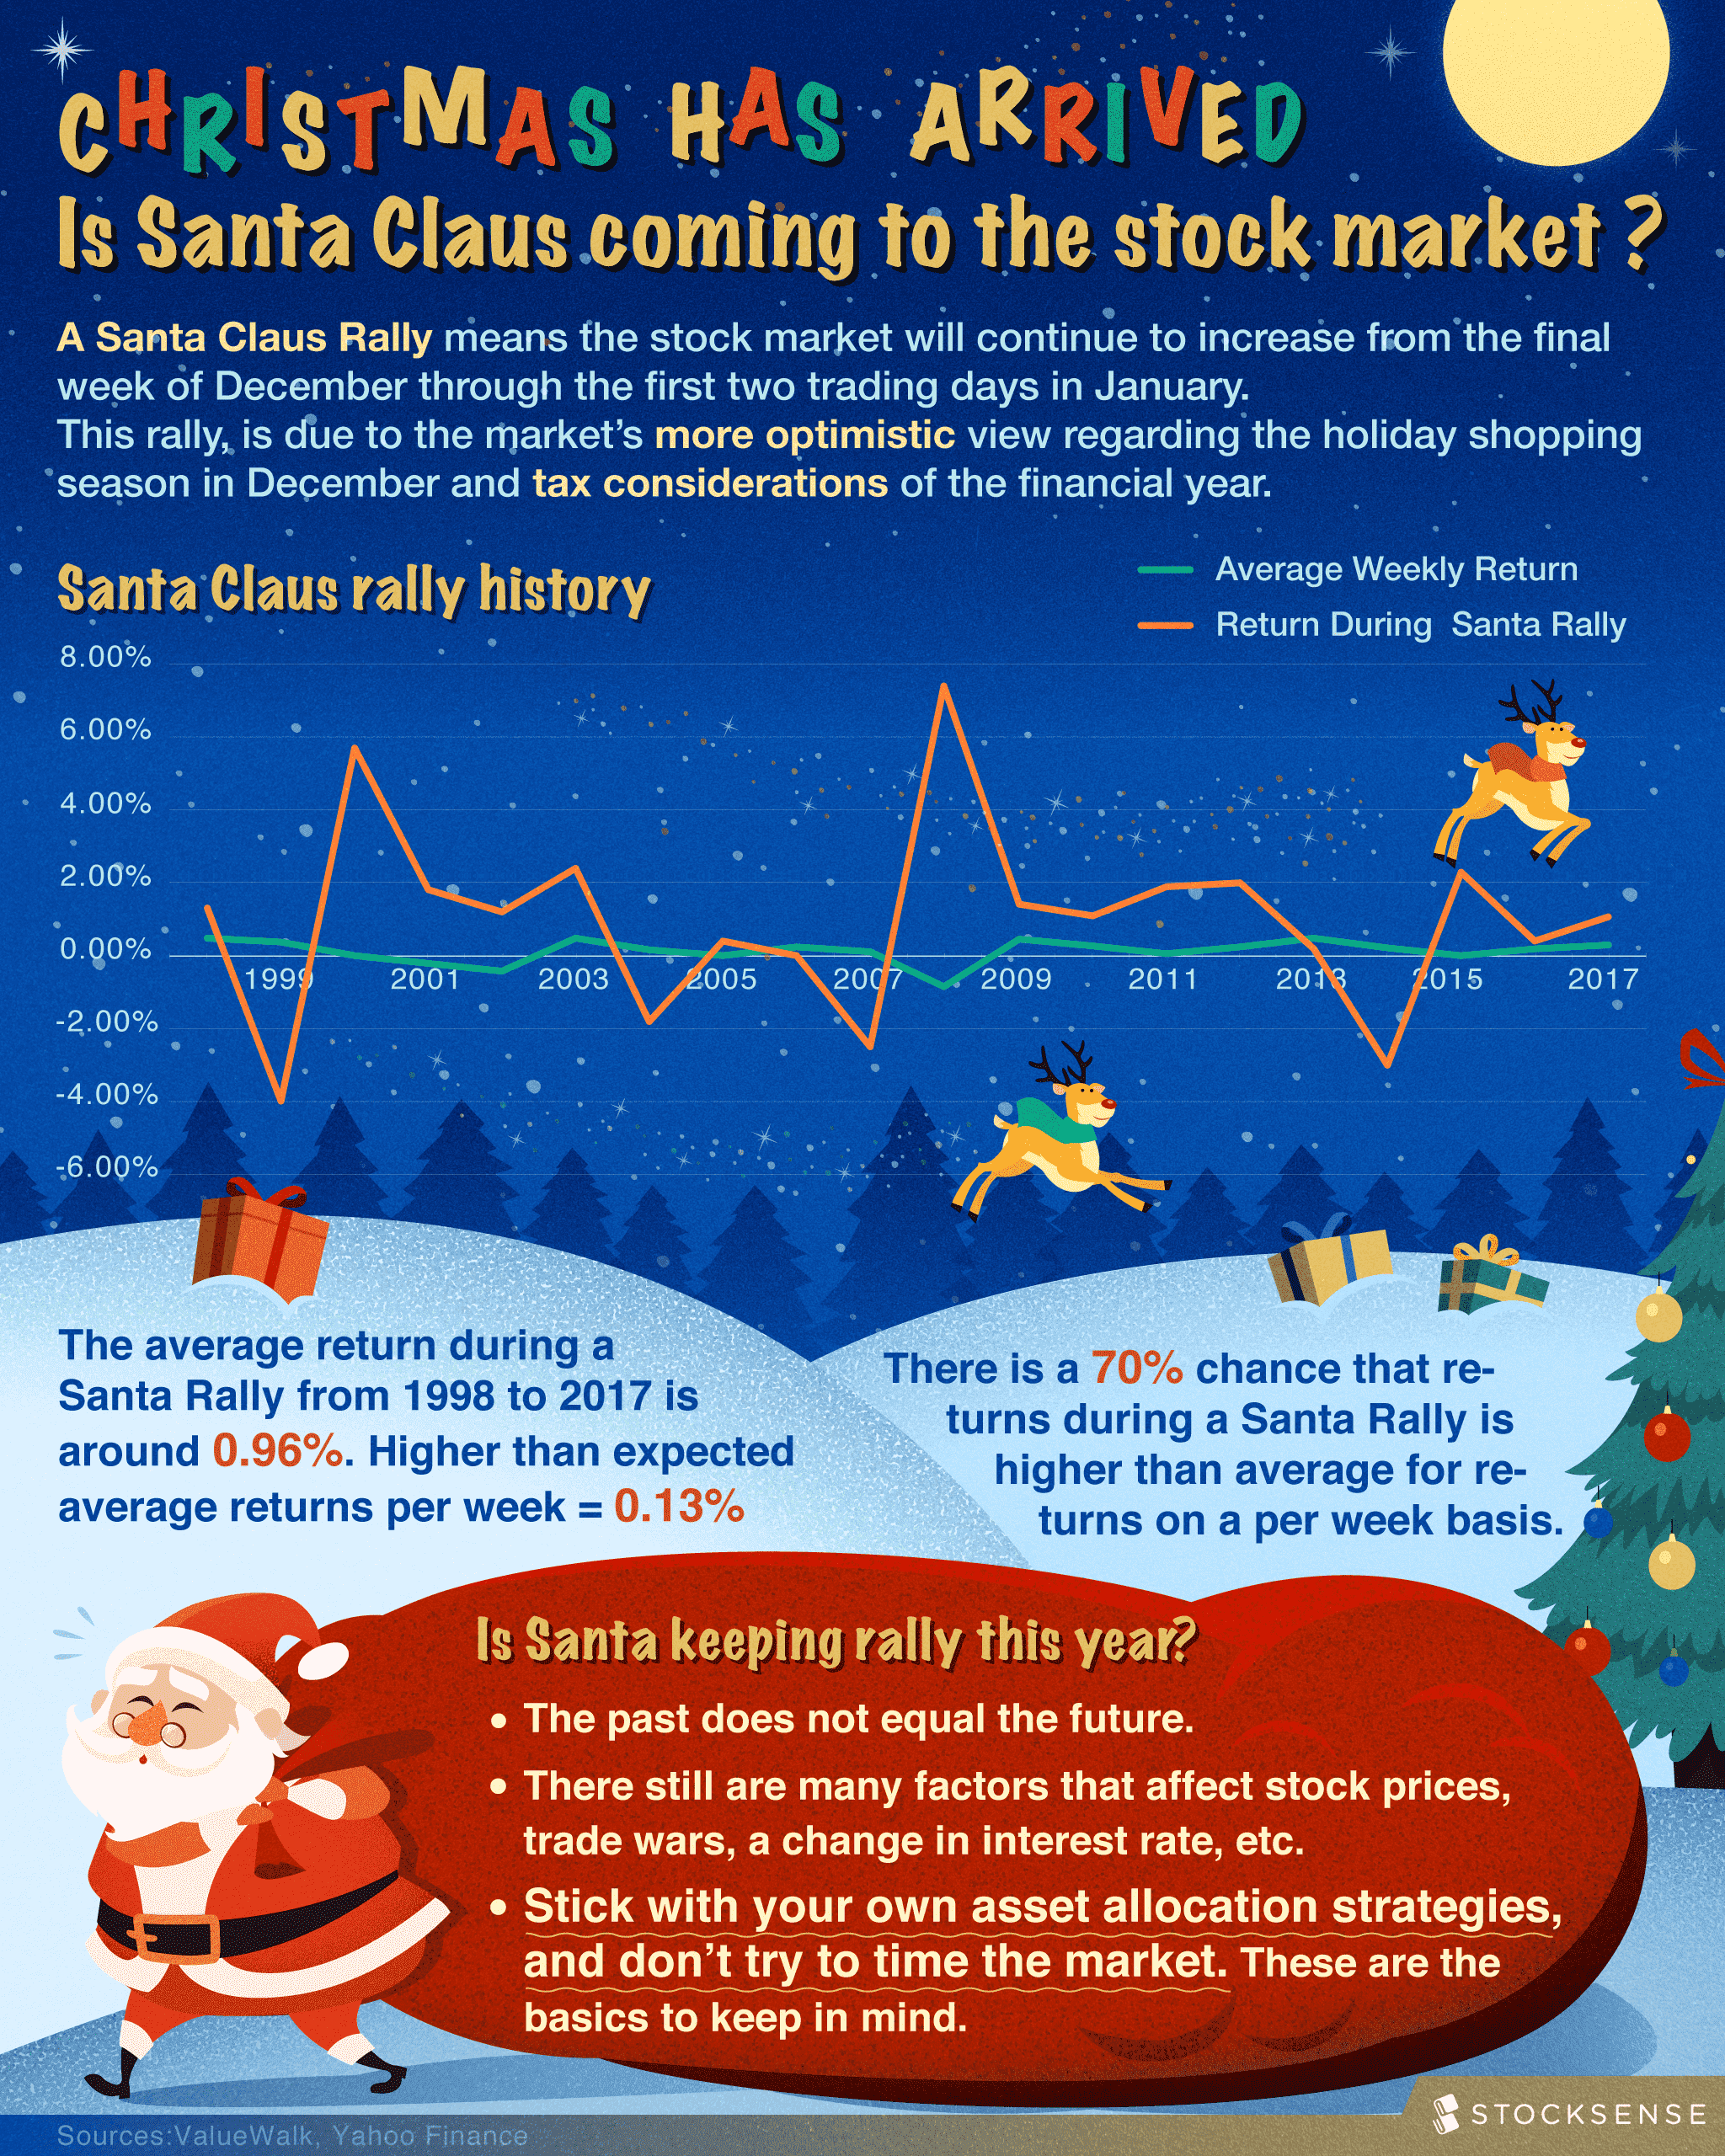 Christmas Has Arrived, Is Santa Claus Coming To The Stock Market